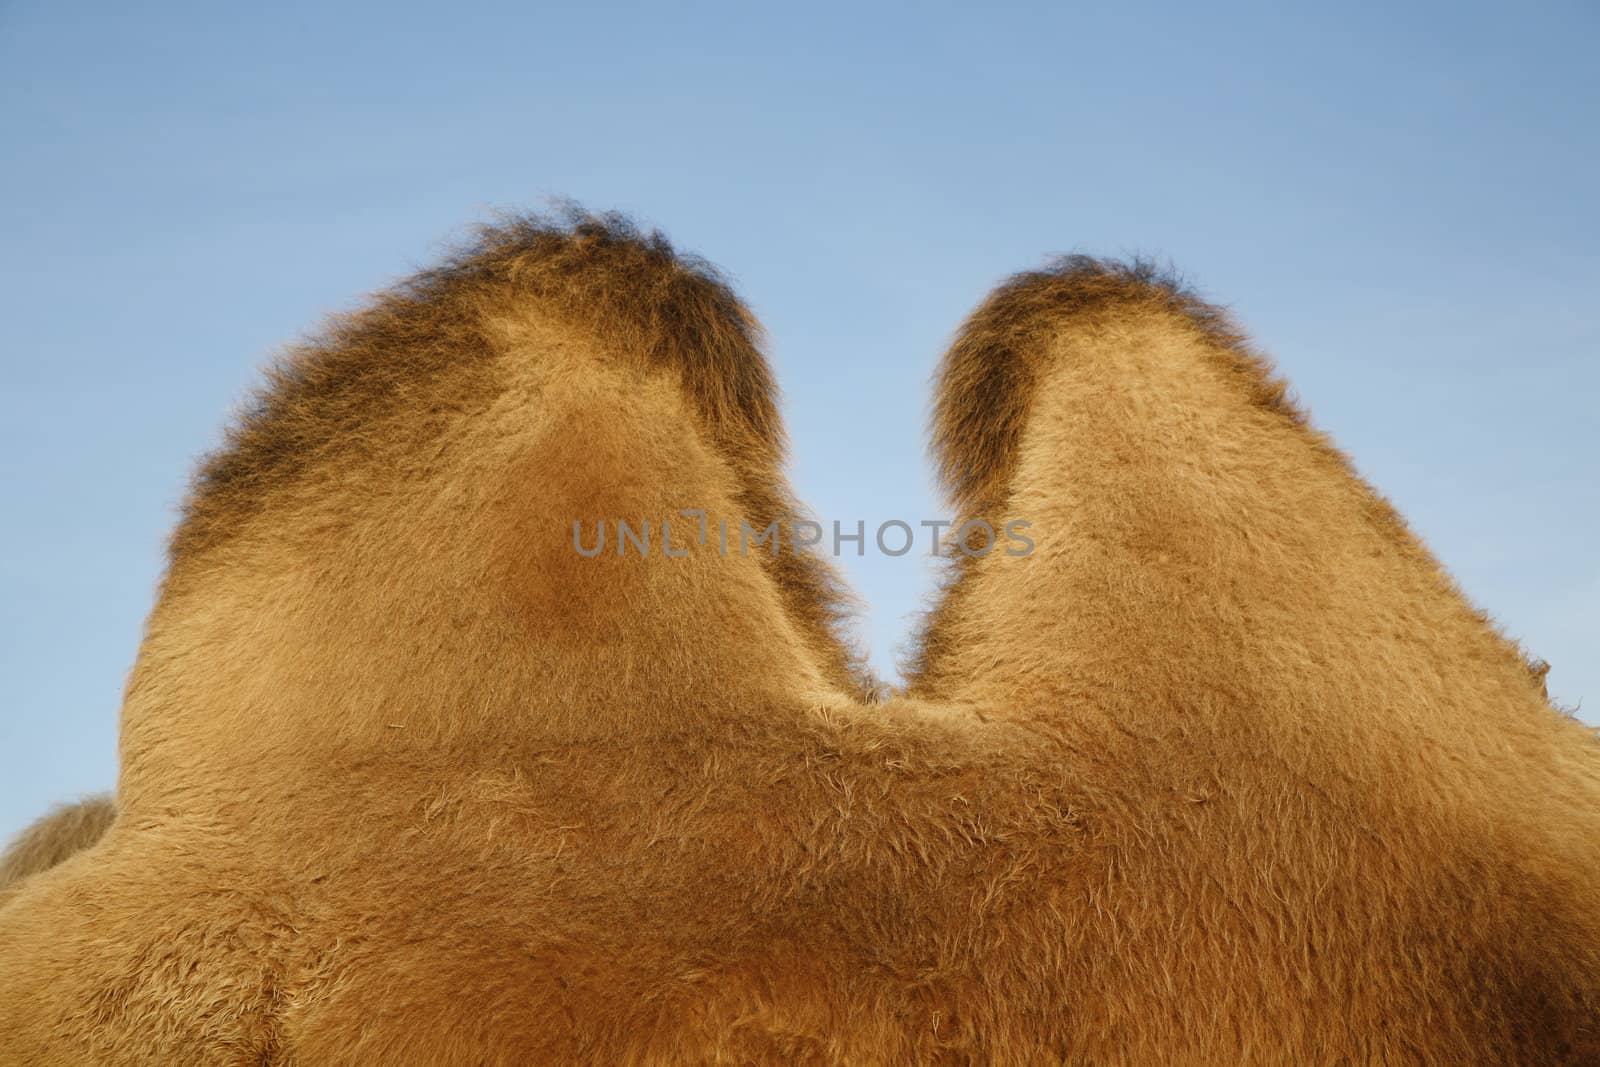 Detail of a camel. Useful for many concepts.